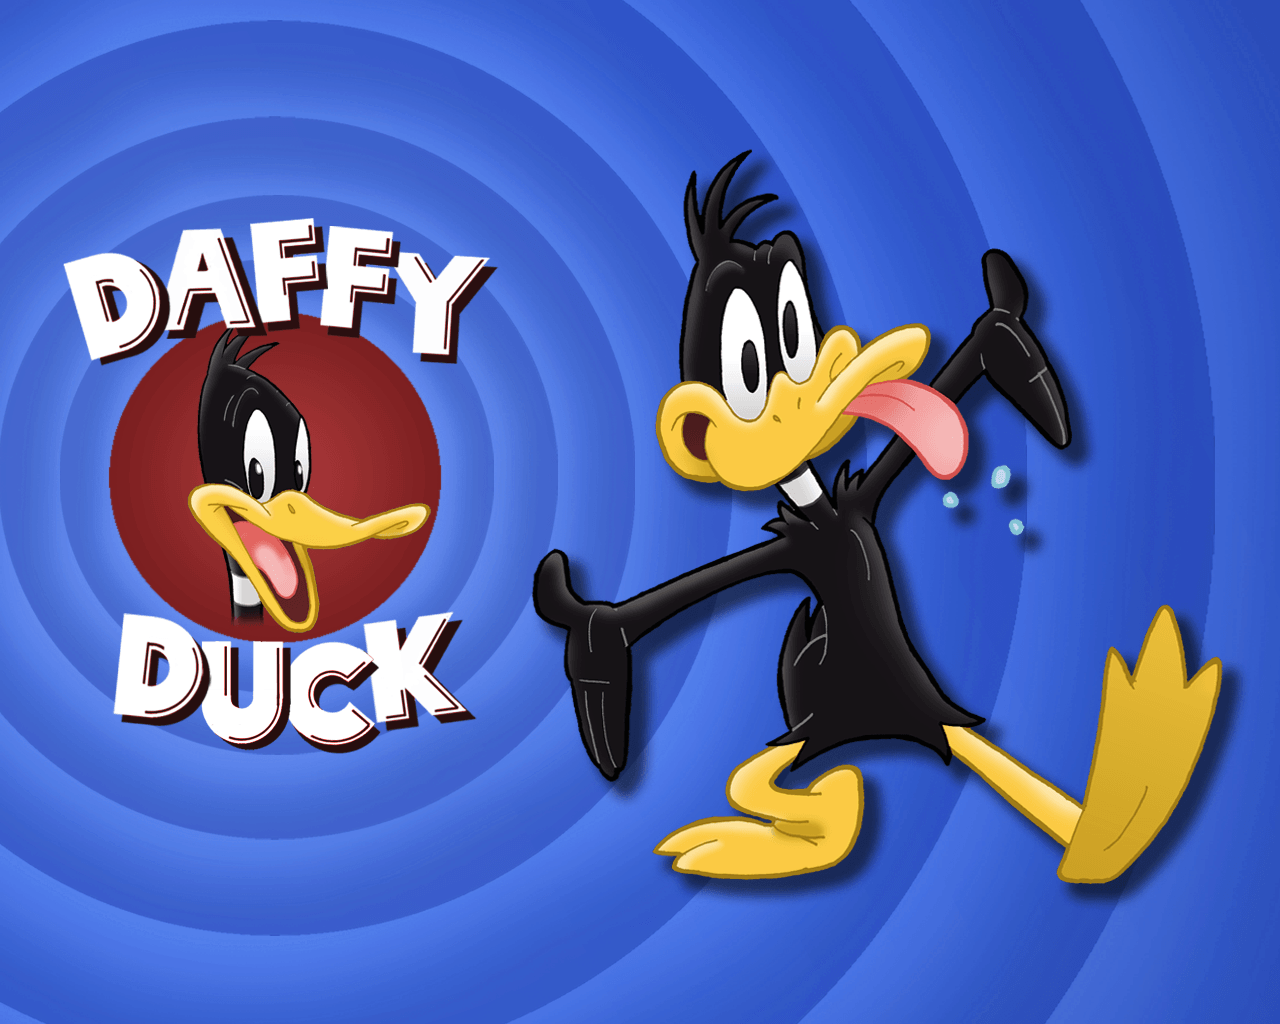 19 Daffy Duck Wallpapers.